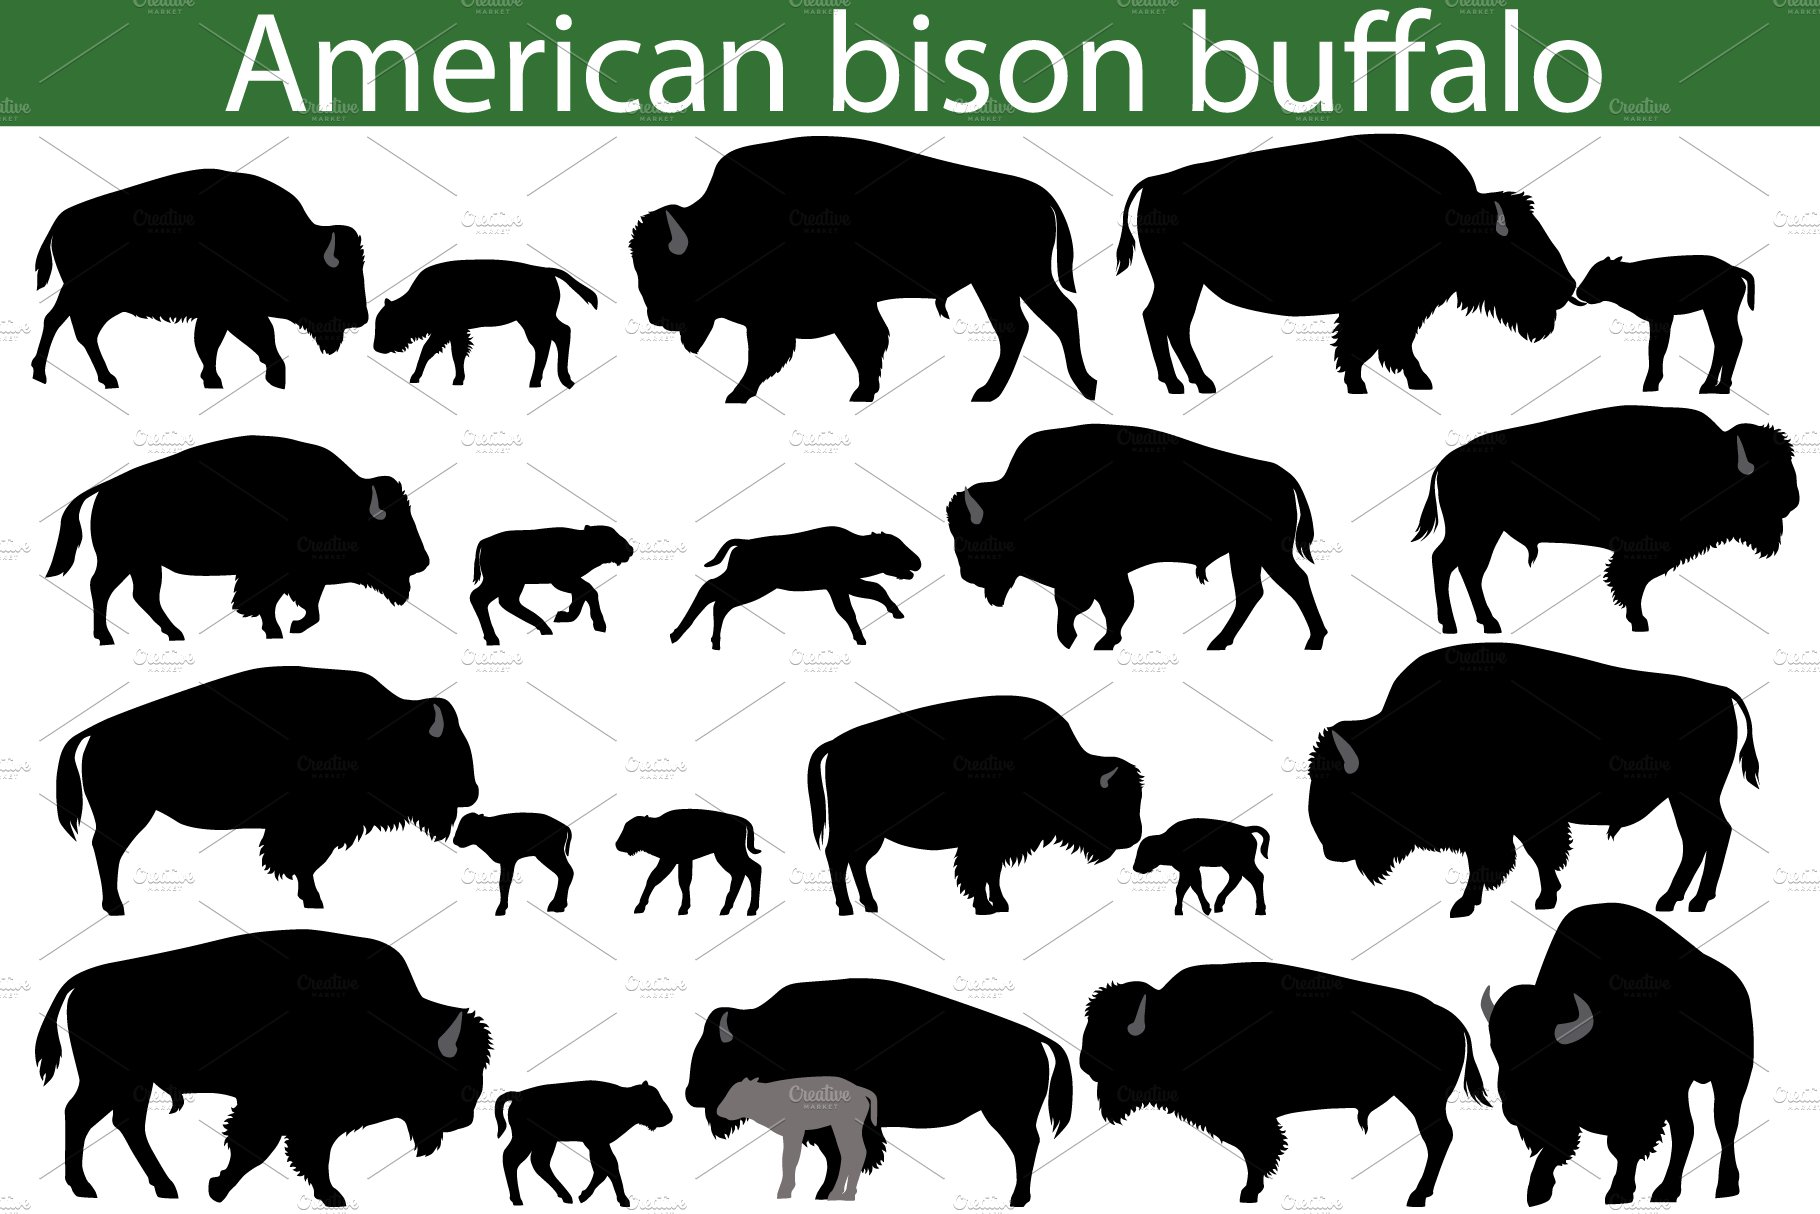 American bison buffalo silhouettes cover image.